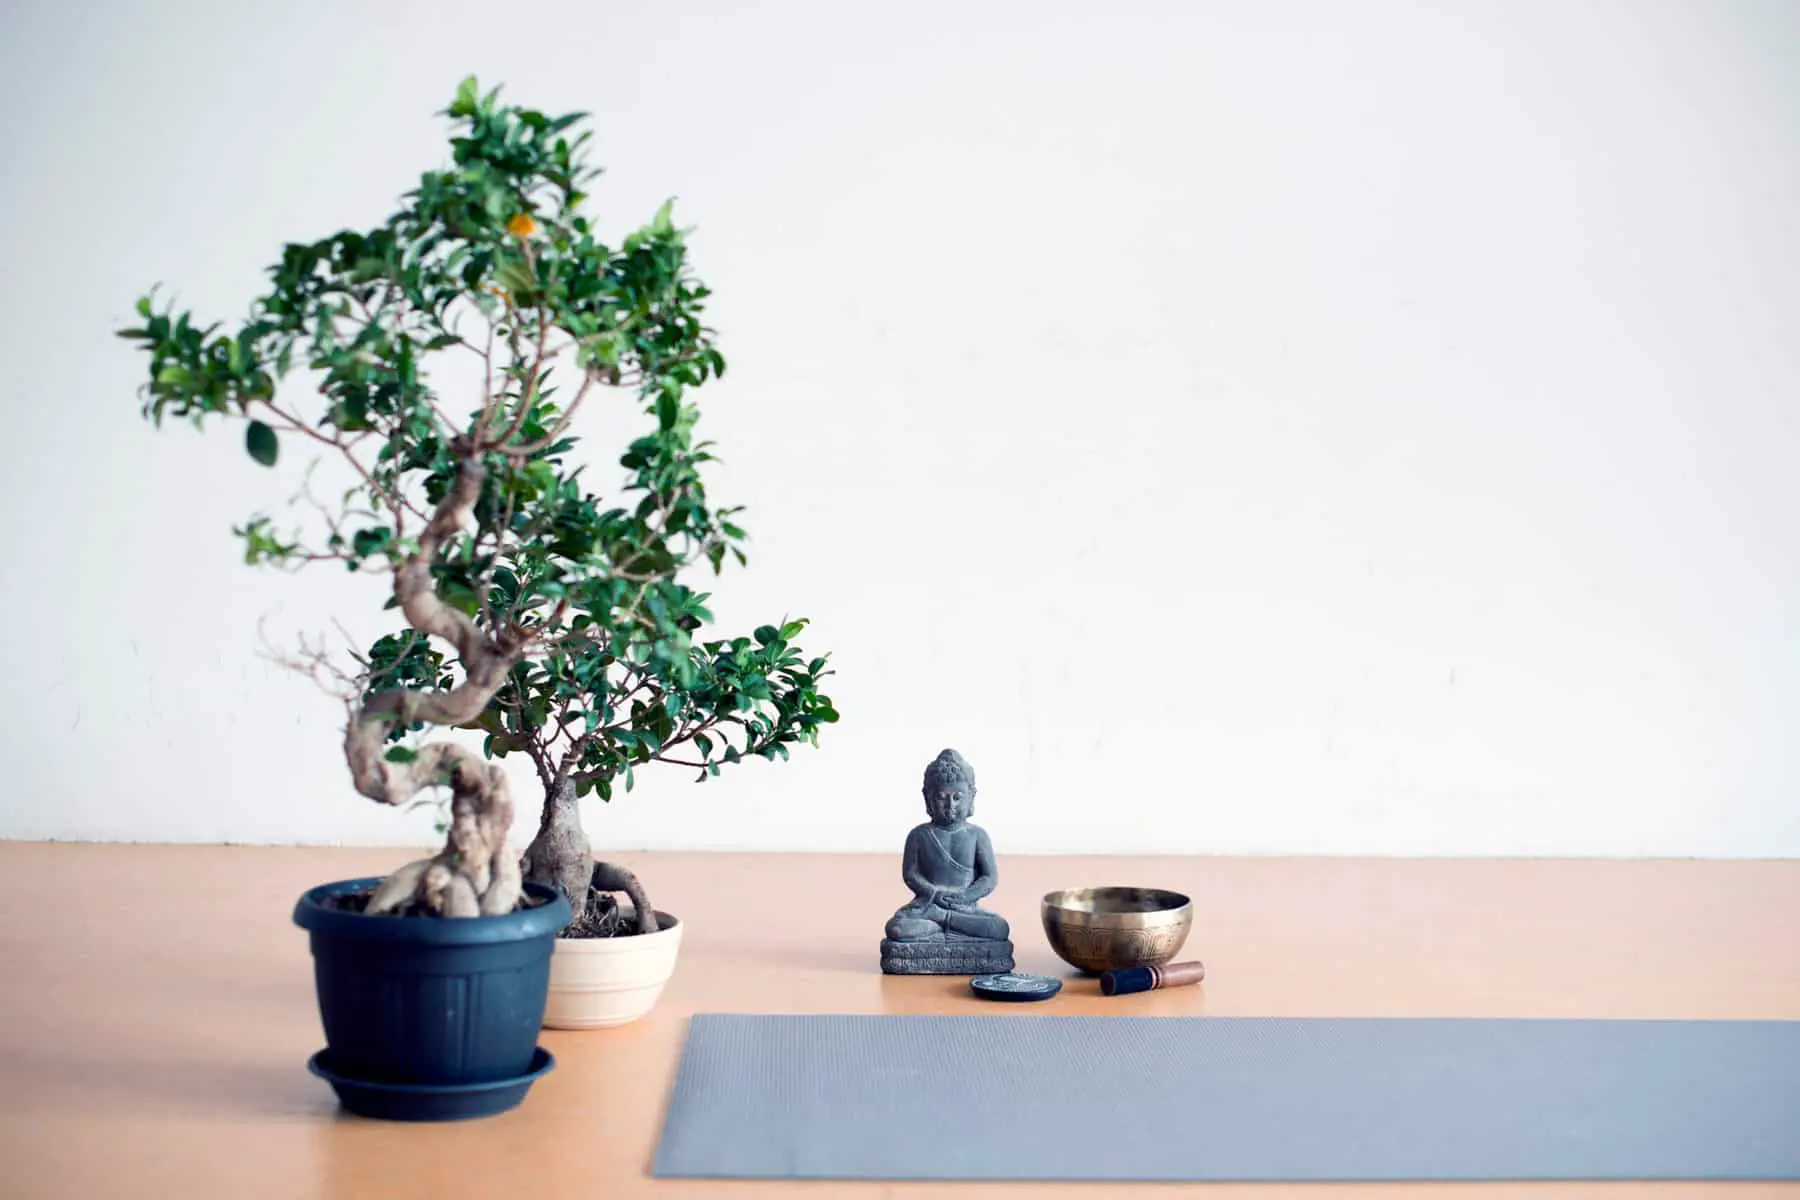 image of a peaceful meditation space, with plants, yoga mat and Buddha statue